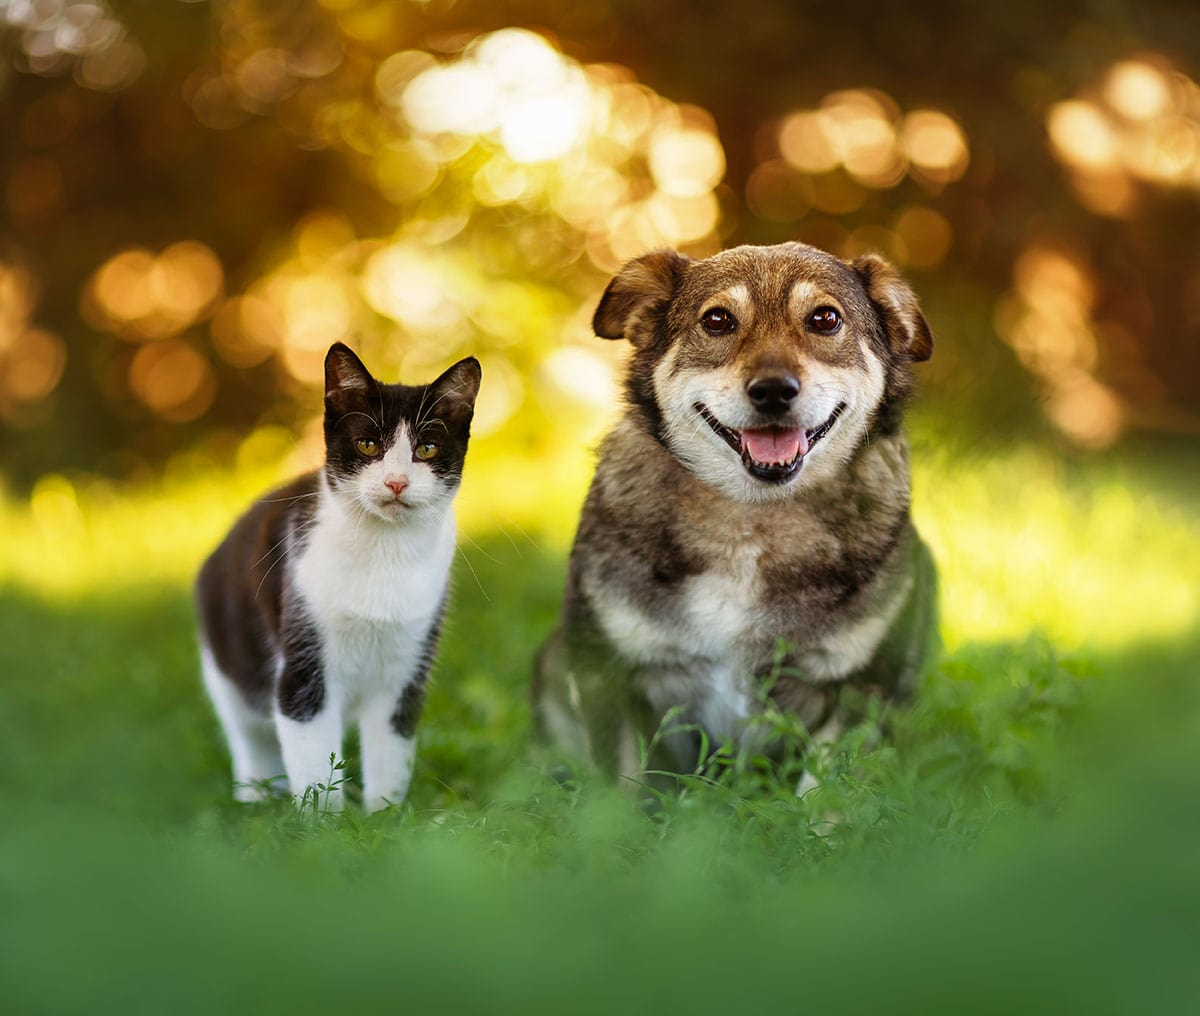 Cute Furry Friends Cat and Dog Sitting in a Sunny Spring Park and Smiling